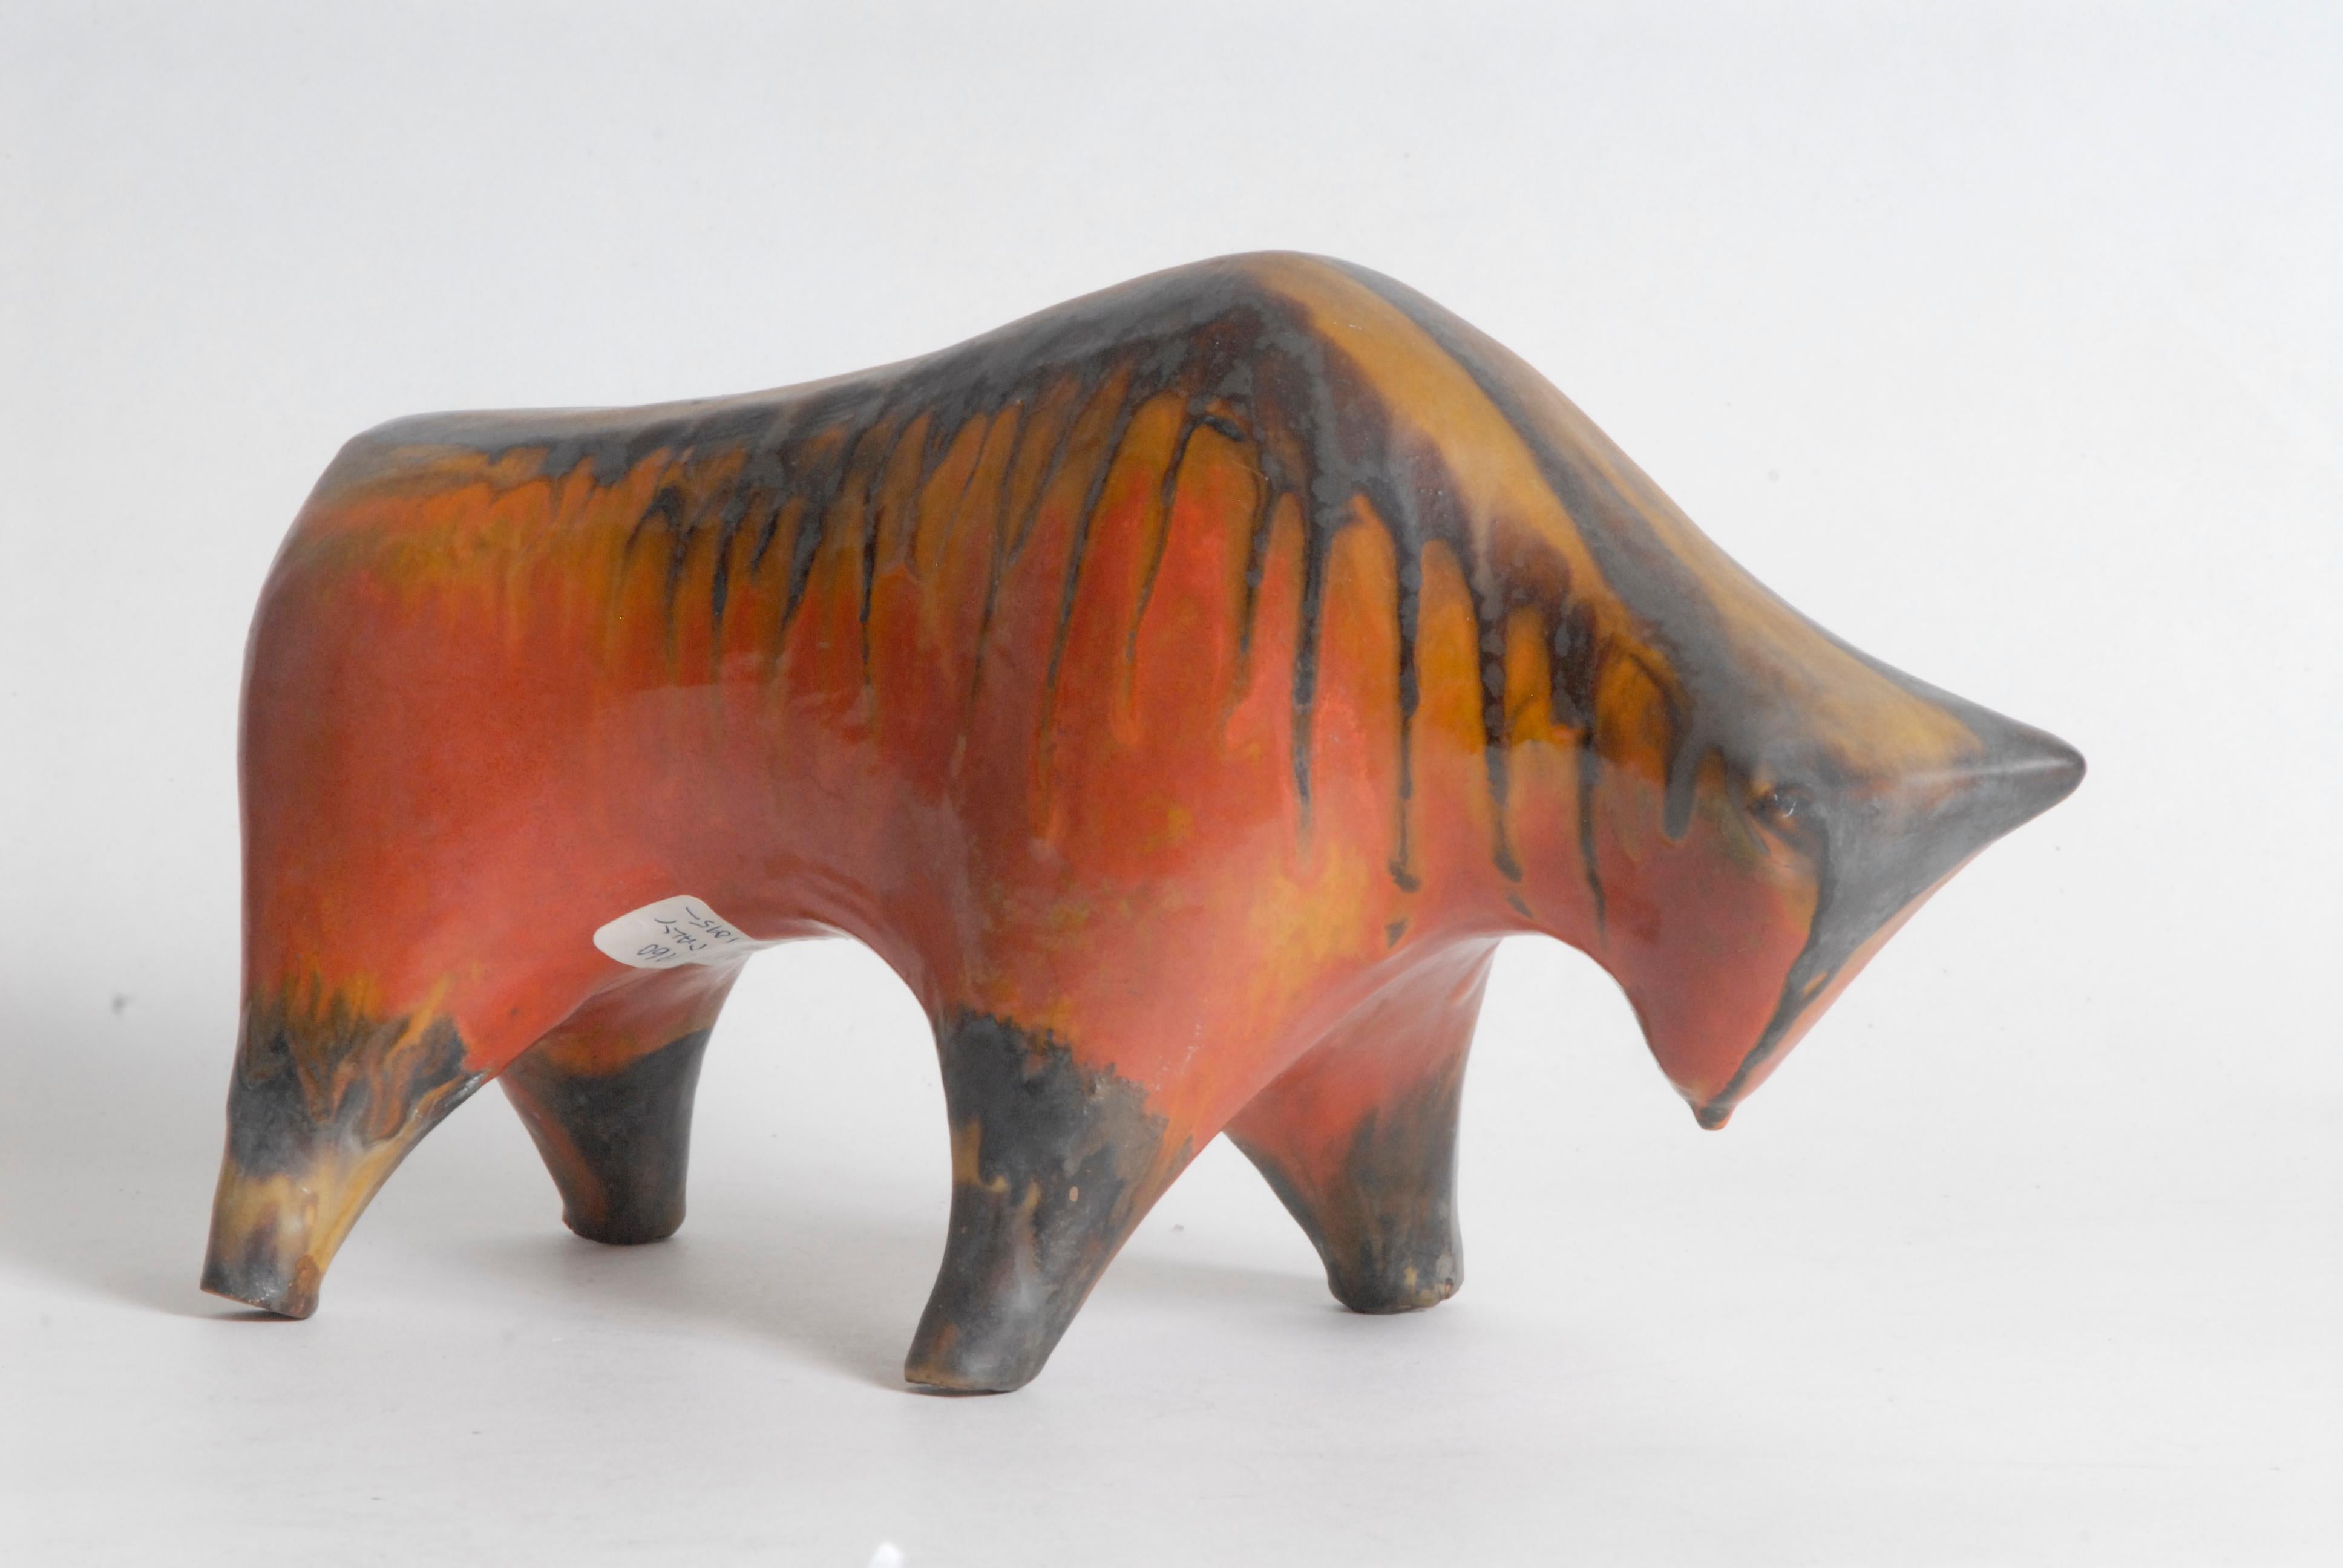 A highly stylized charging bull in orange and brown, typical of Bagni's designs of midcentury Italian motifs.